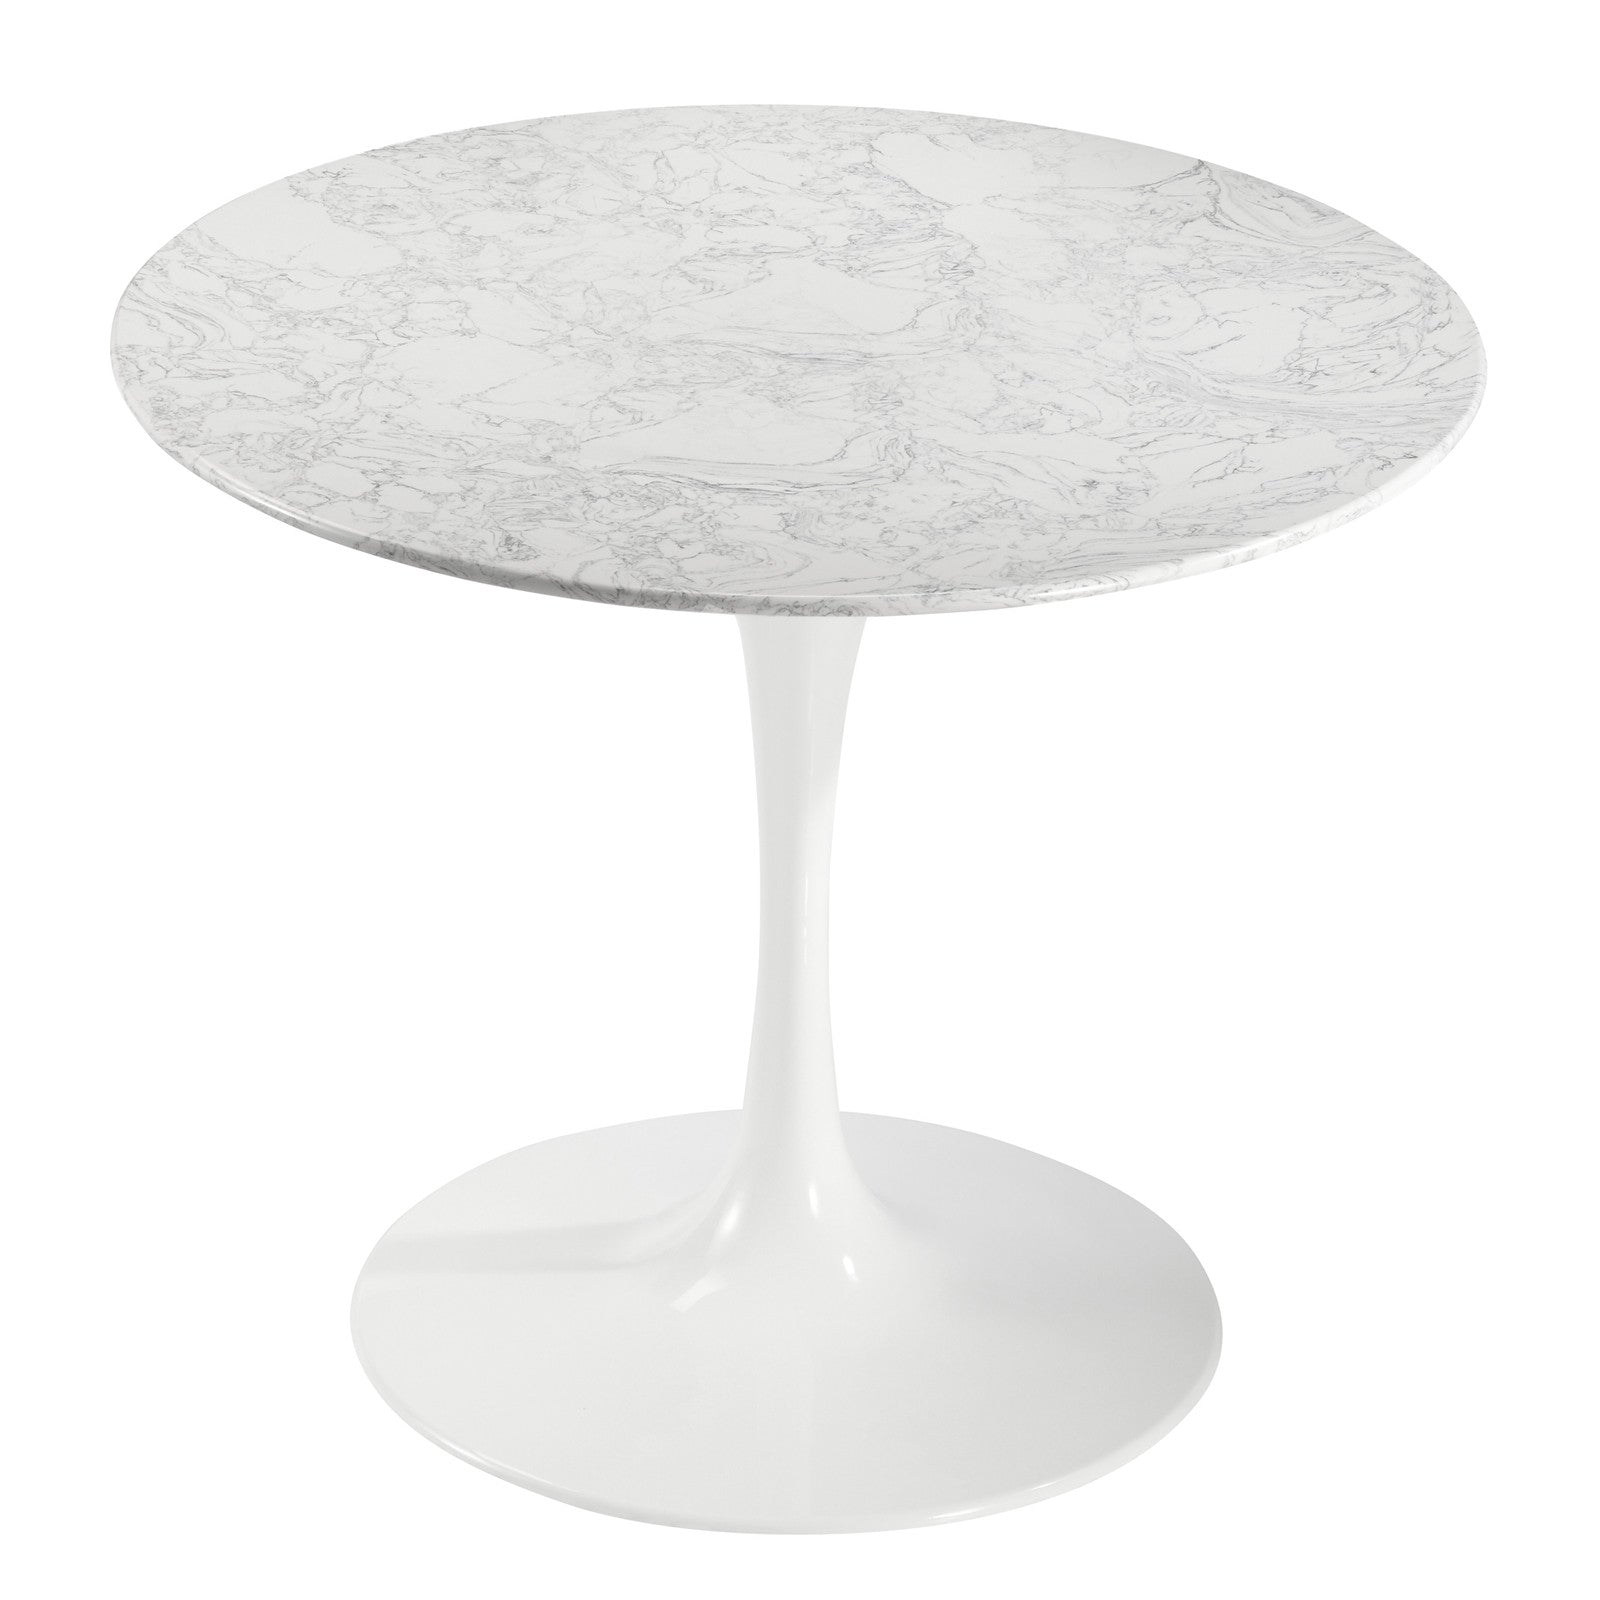 EdgeMod Daisy 36" Artificial Marble Dining Table In White